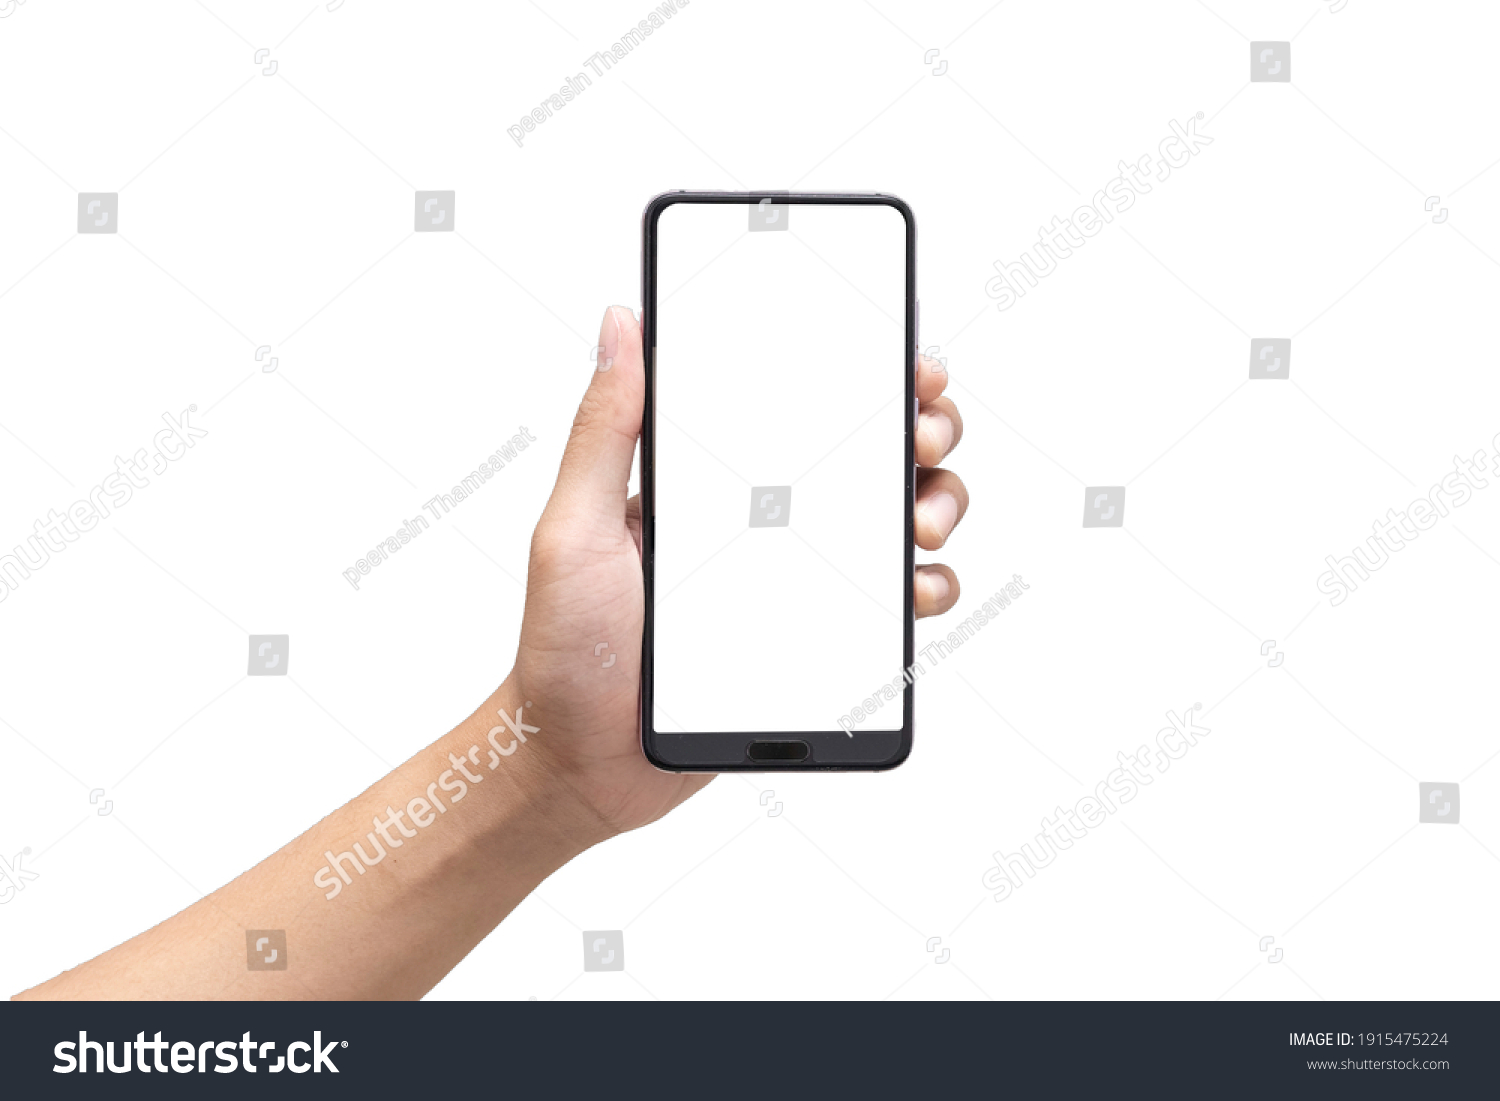 Hand holding mobile phone with blank screen on white background. Isolated. #1915475224